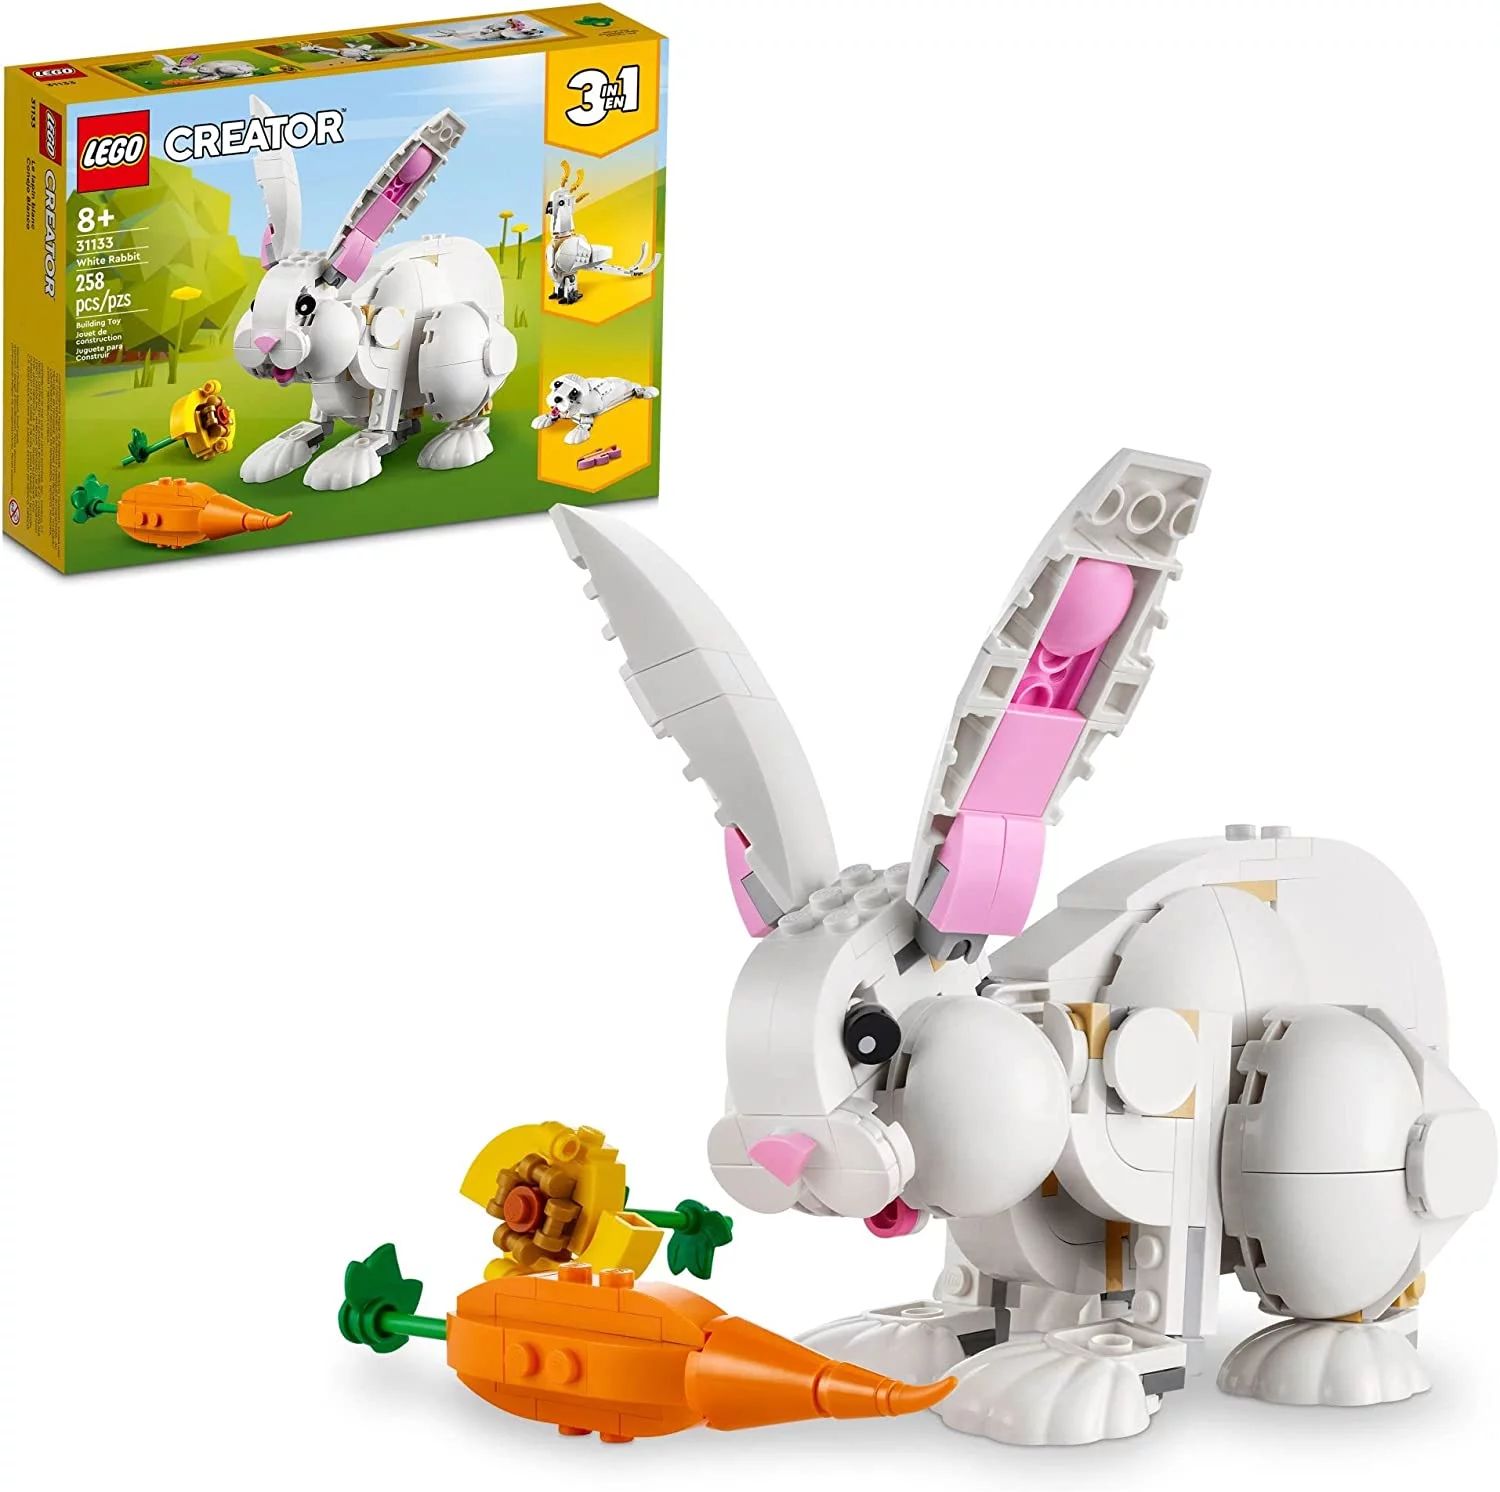 LEGO Creator 3 in 1 White Rabbit Animal Toy Building Set, Easter Gift for Kids Ages 8+, Build an ... | Walmart (US)